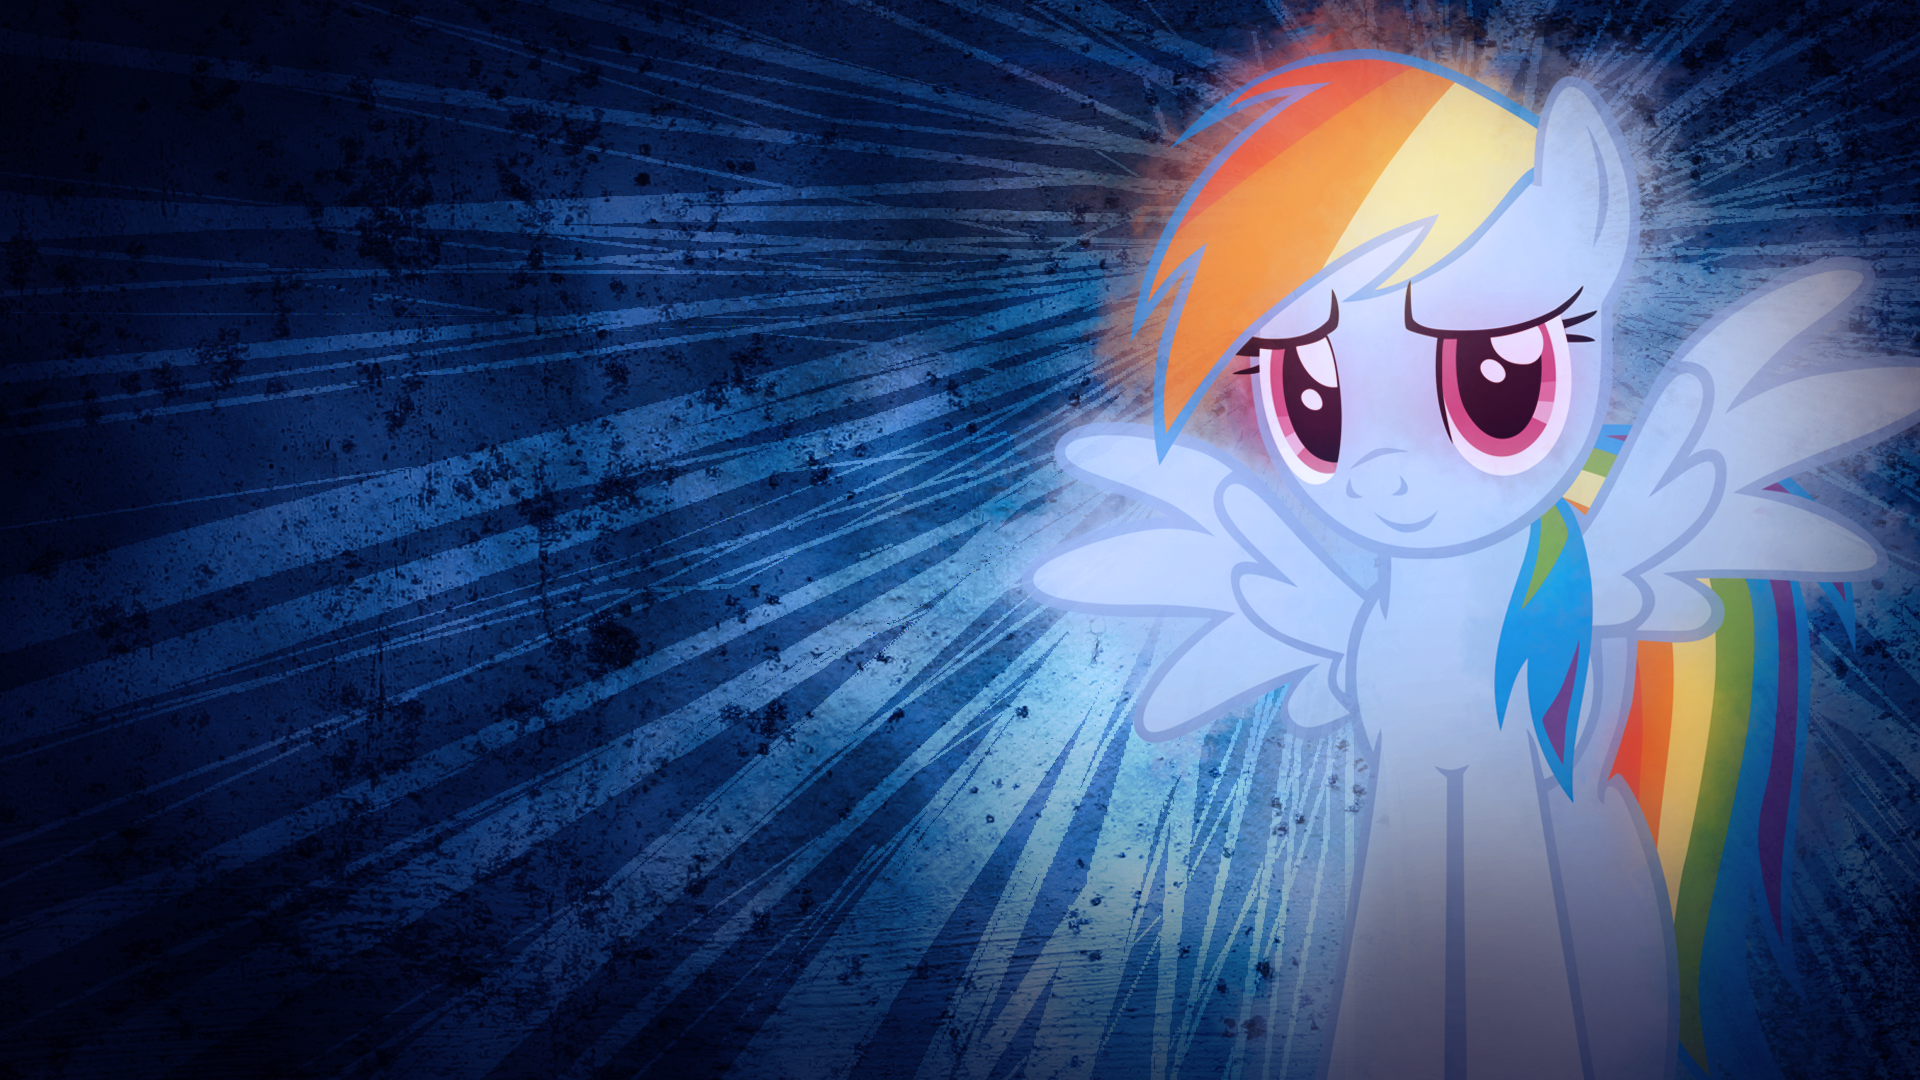 Wallpaper of Dashie being Cute by SandwichDelta and vectorvector